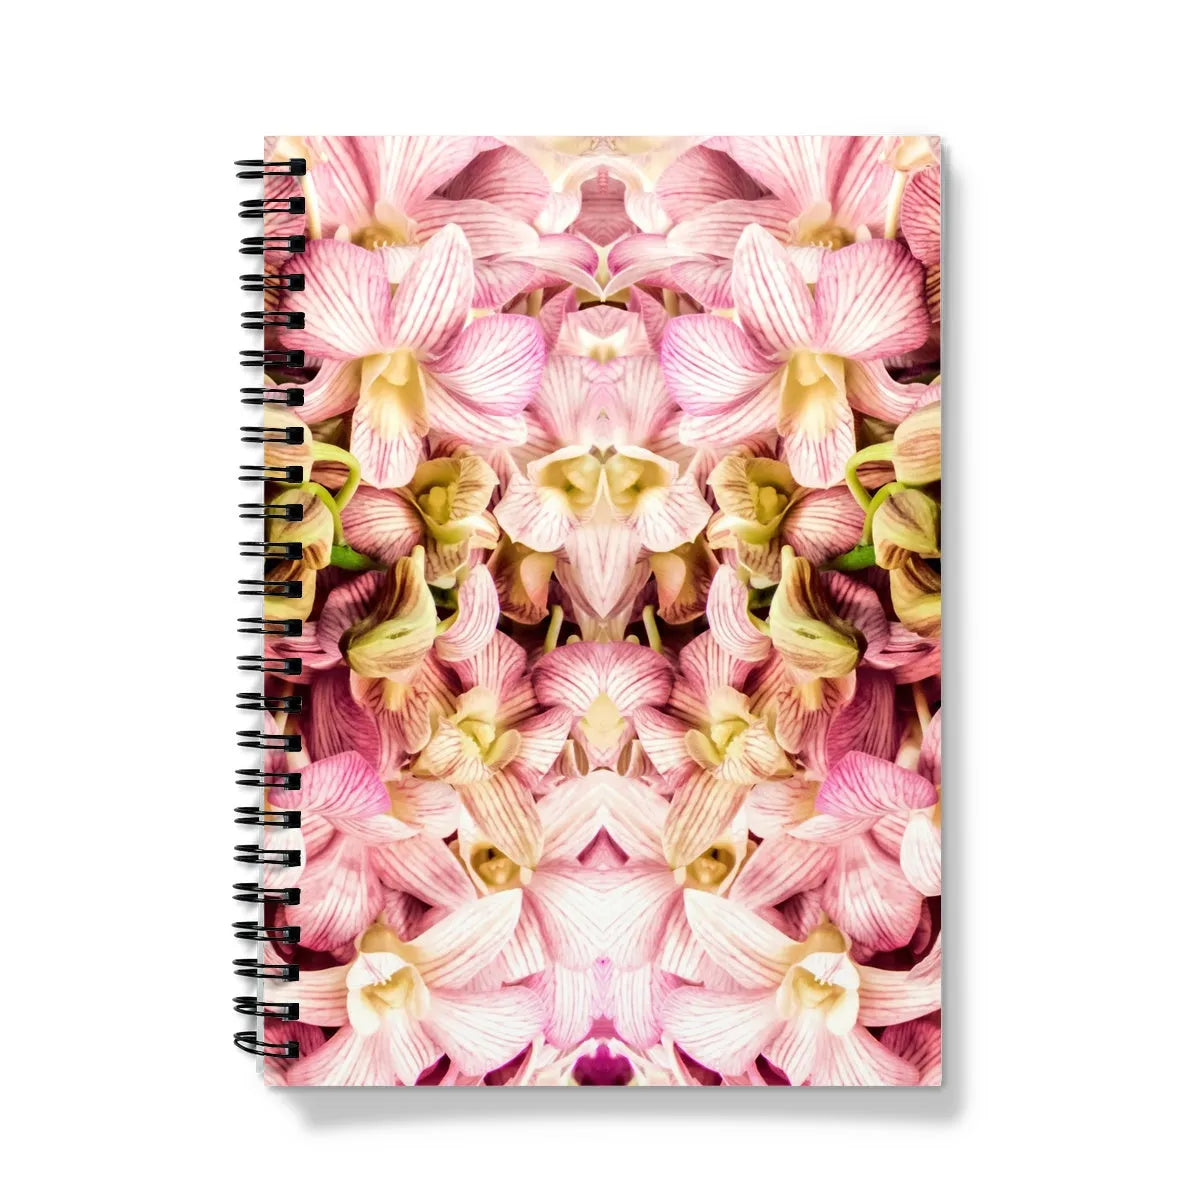 Pretty In Pink Notebook - A5 - Graph Paper - Notebooks & Notepads - Aesthetic Art